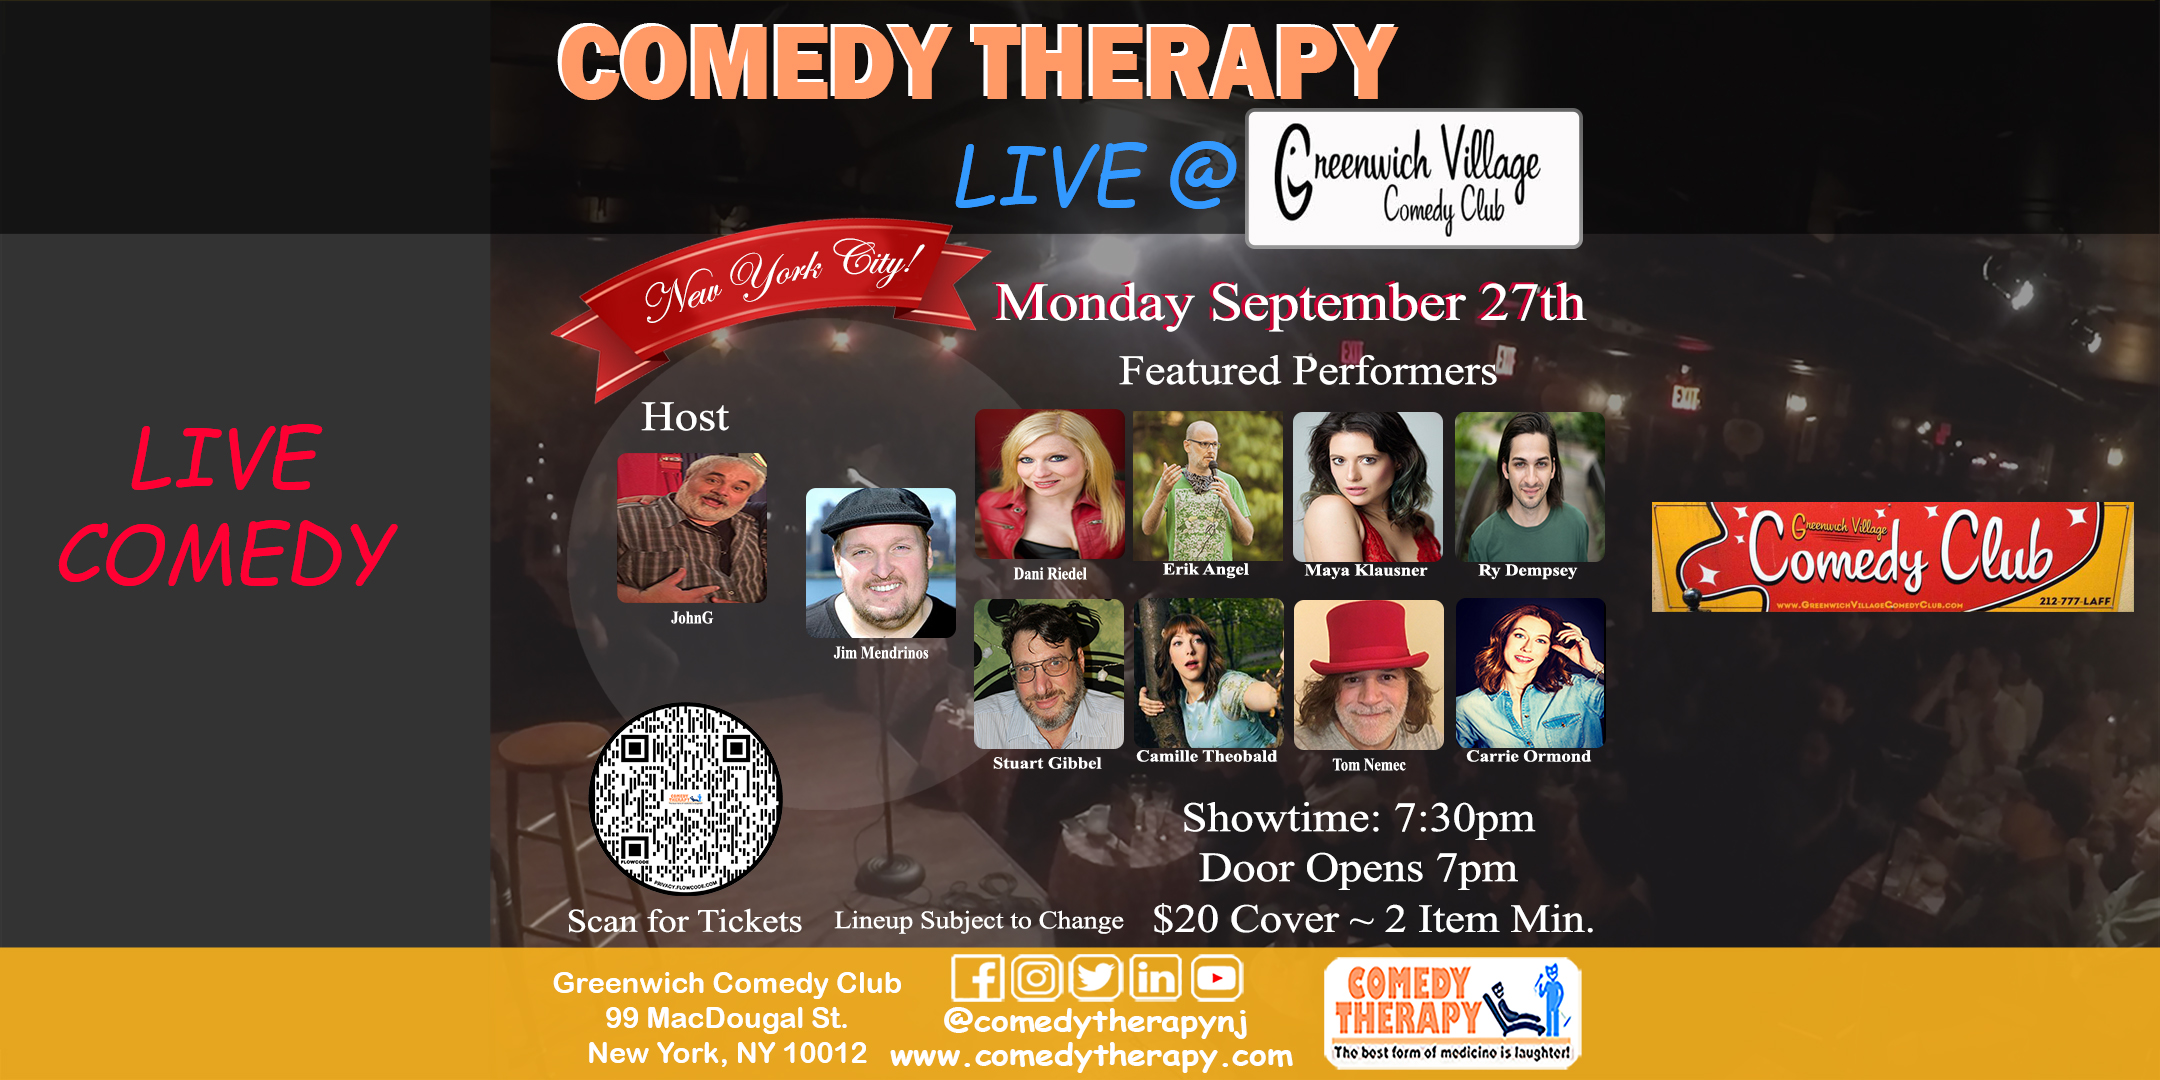 Comedy Therapy Live at Greenwich Village Comedy Club Sept 27